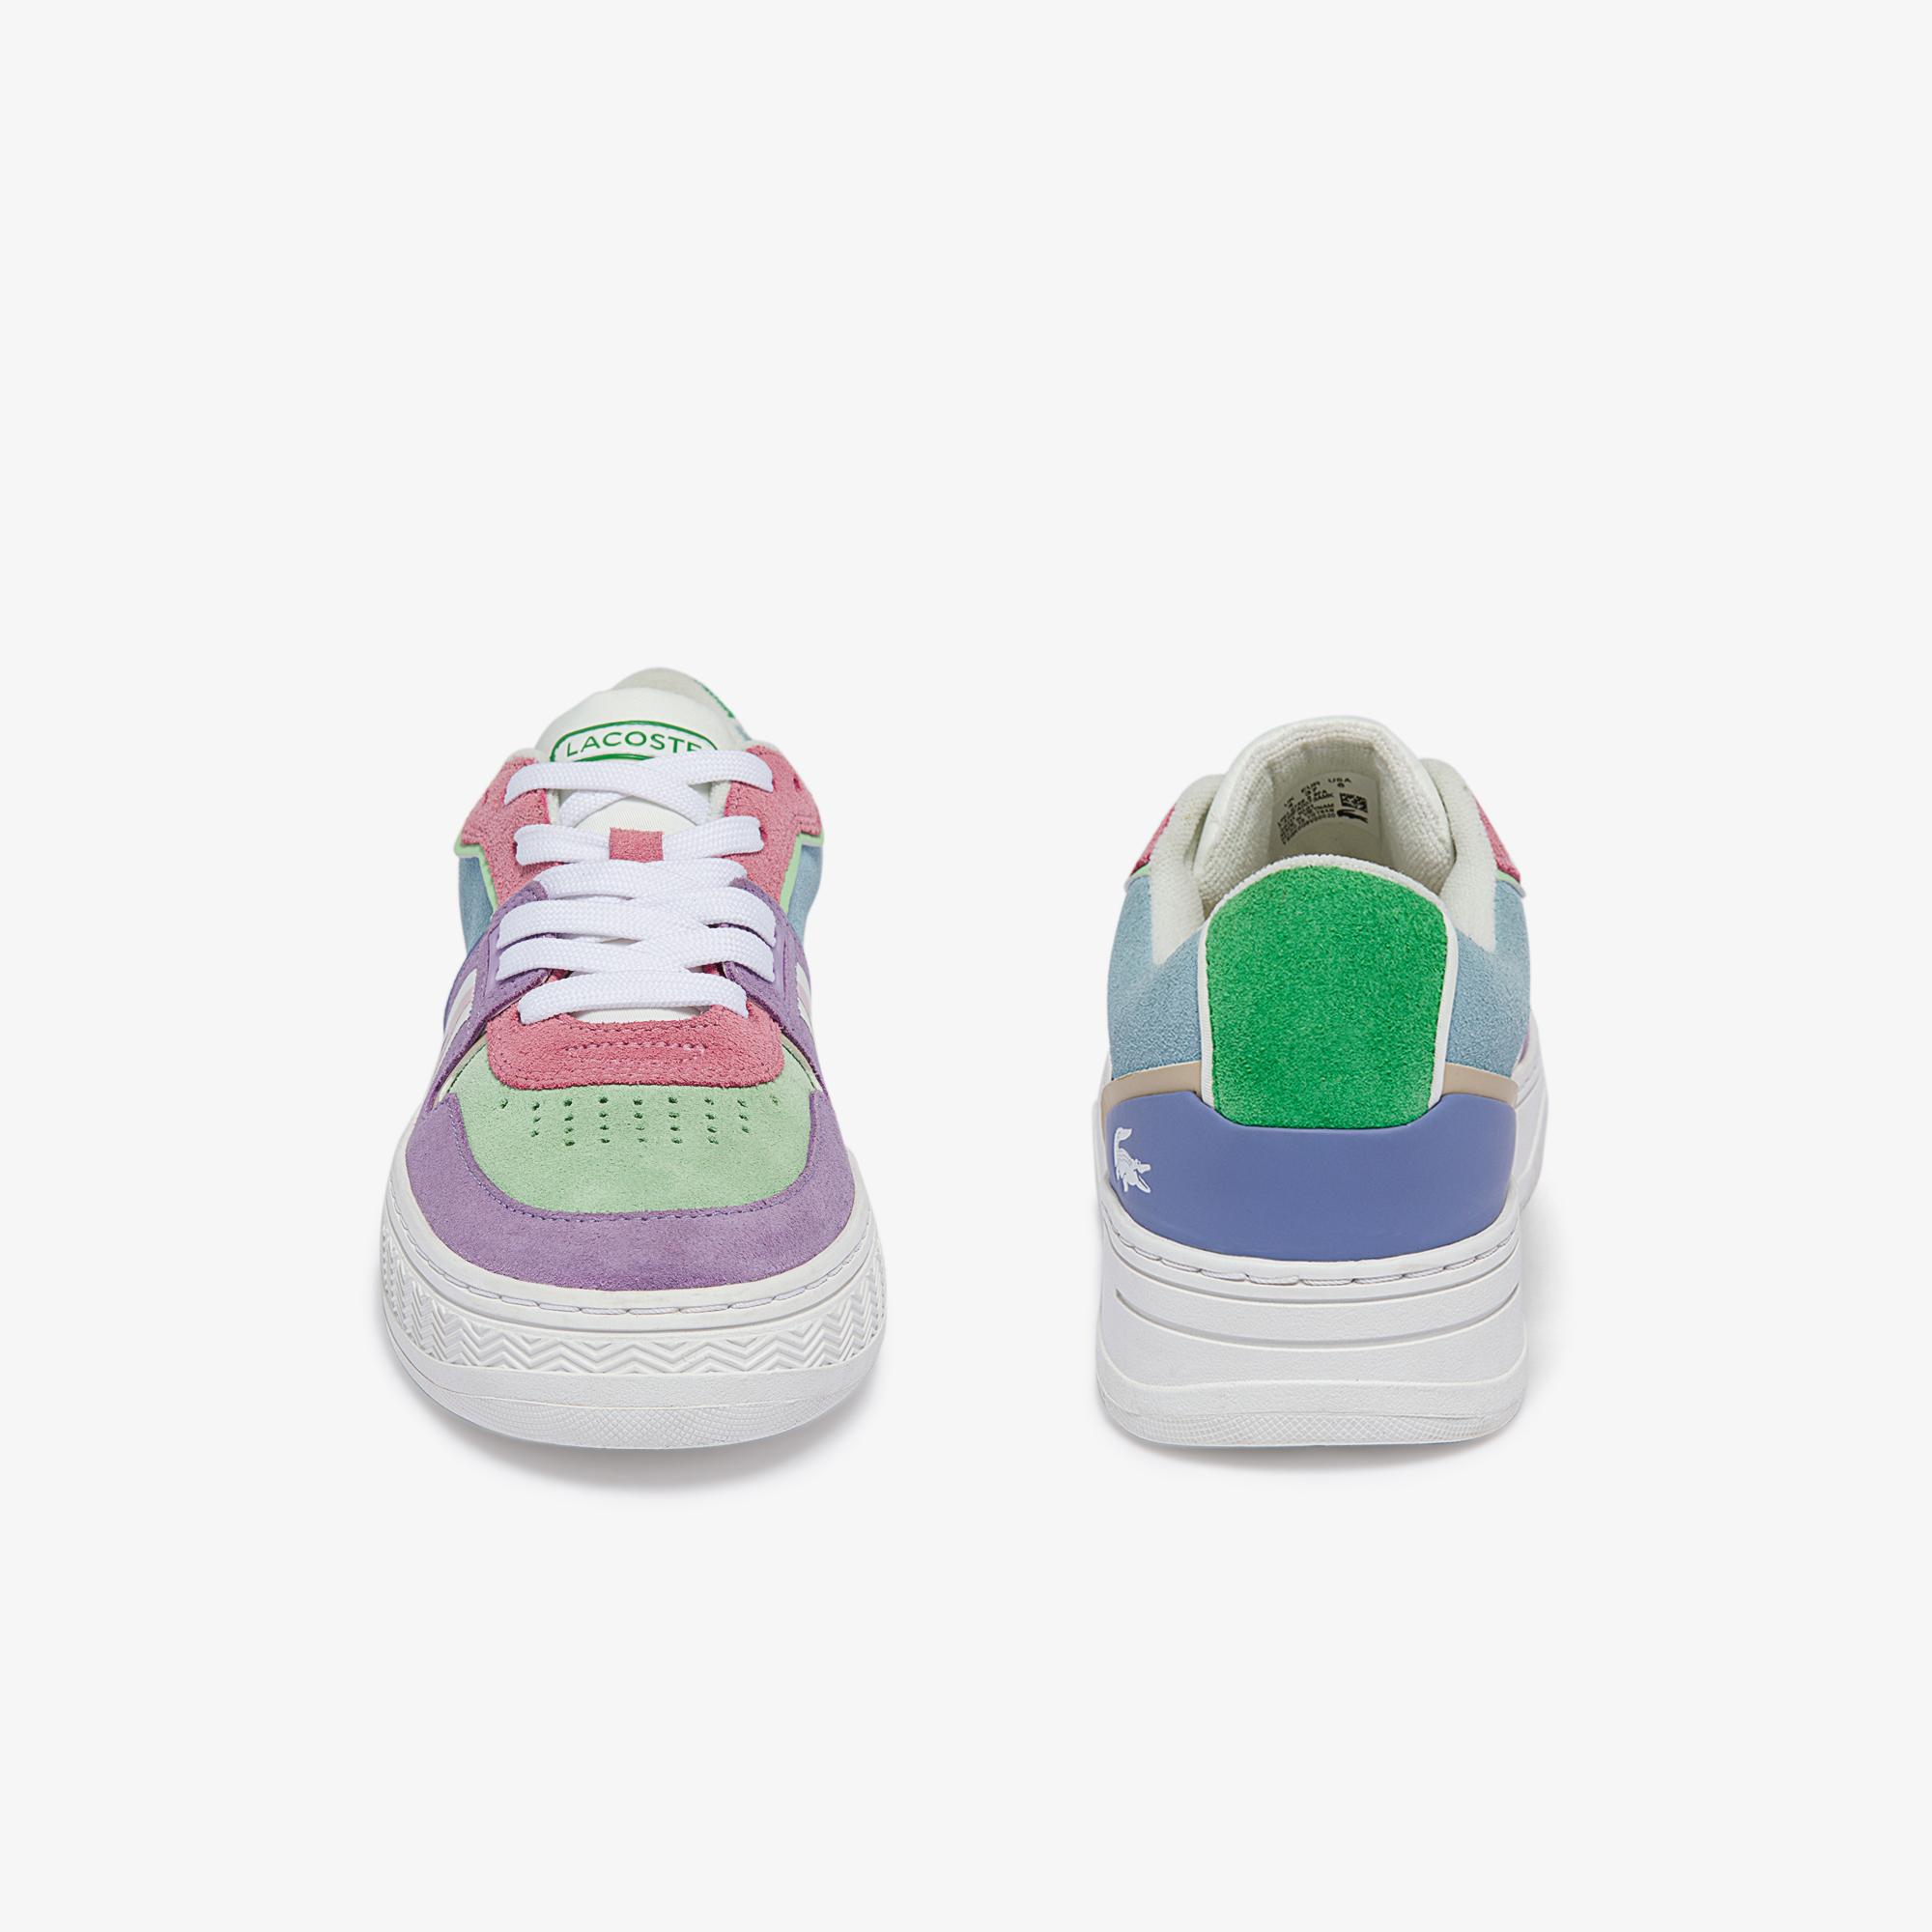 Lacoste Women's L001 Leather and Suede Colour-Block Trainers